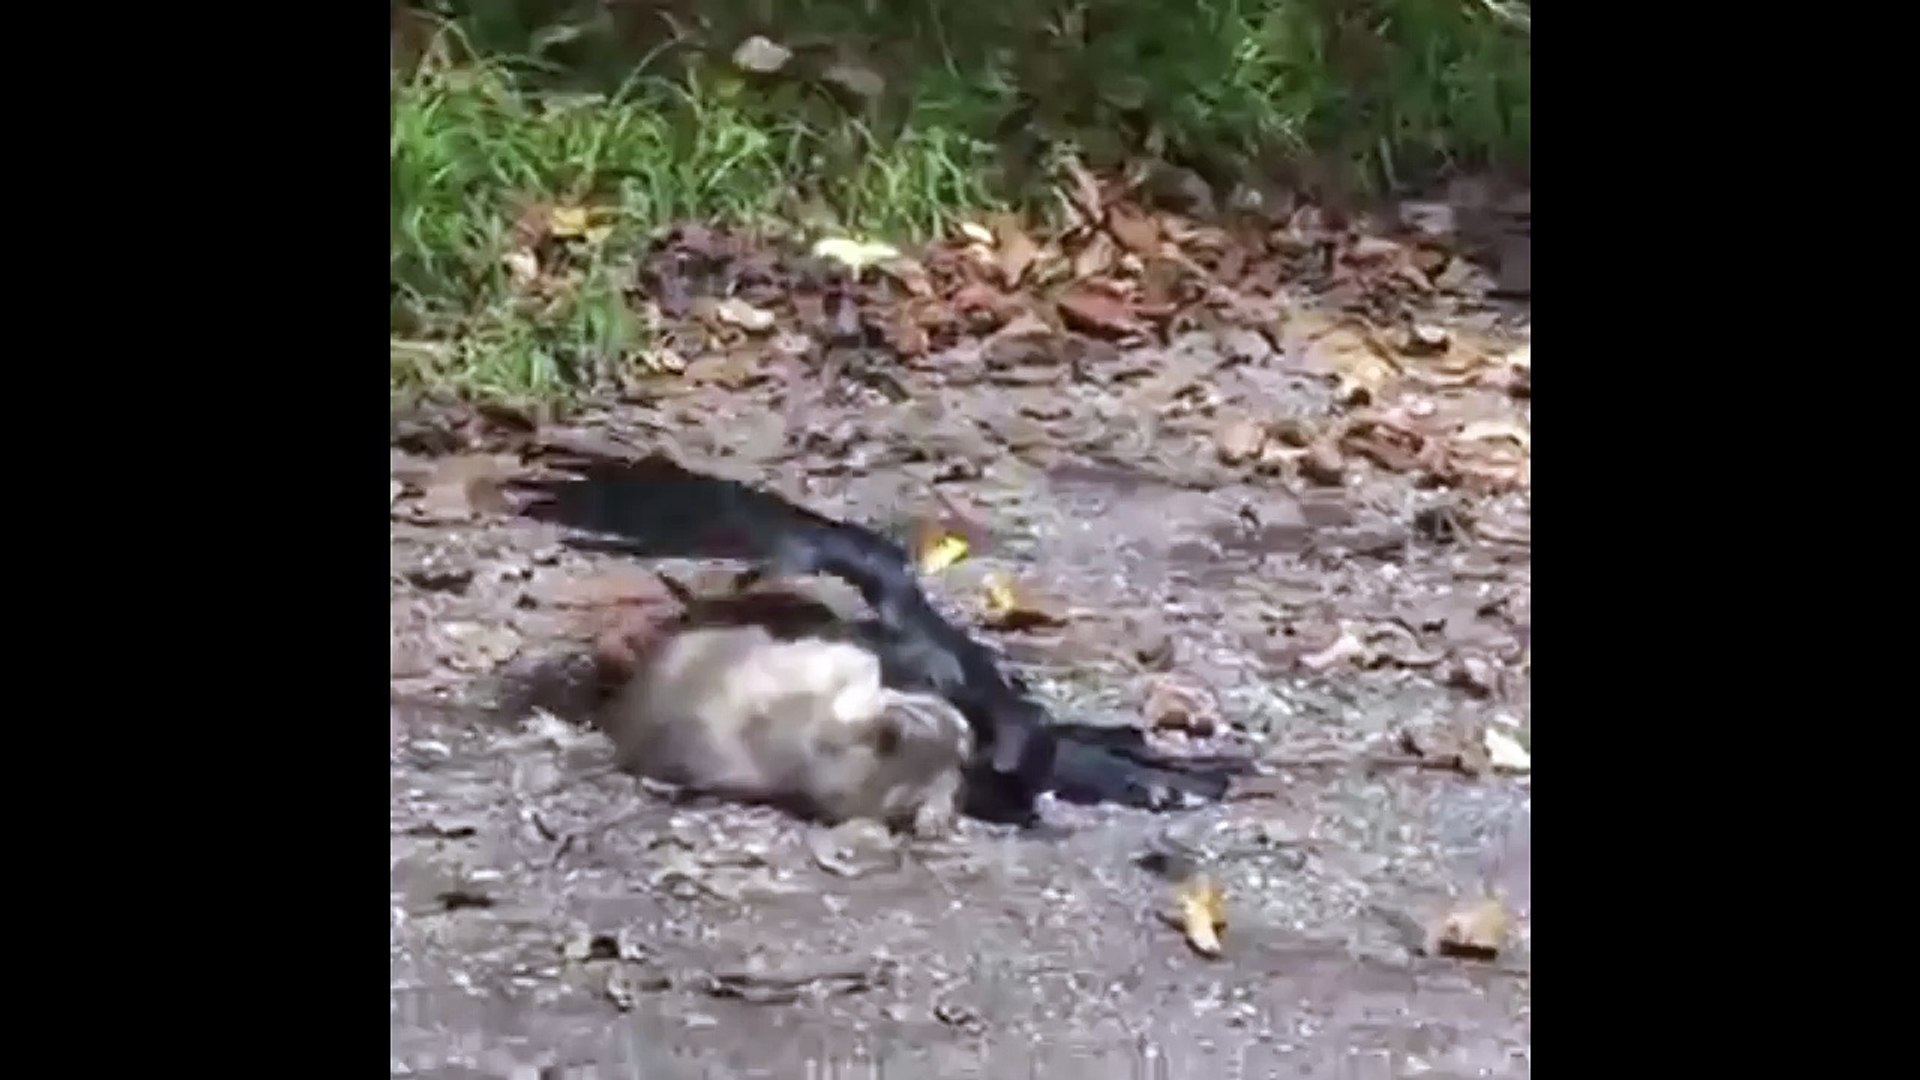 cat vs crow fight | Most Amazing Cat Attack and kill Crow wild animal attack videos